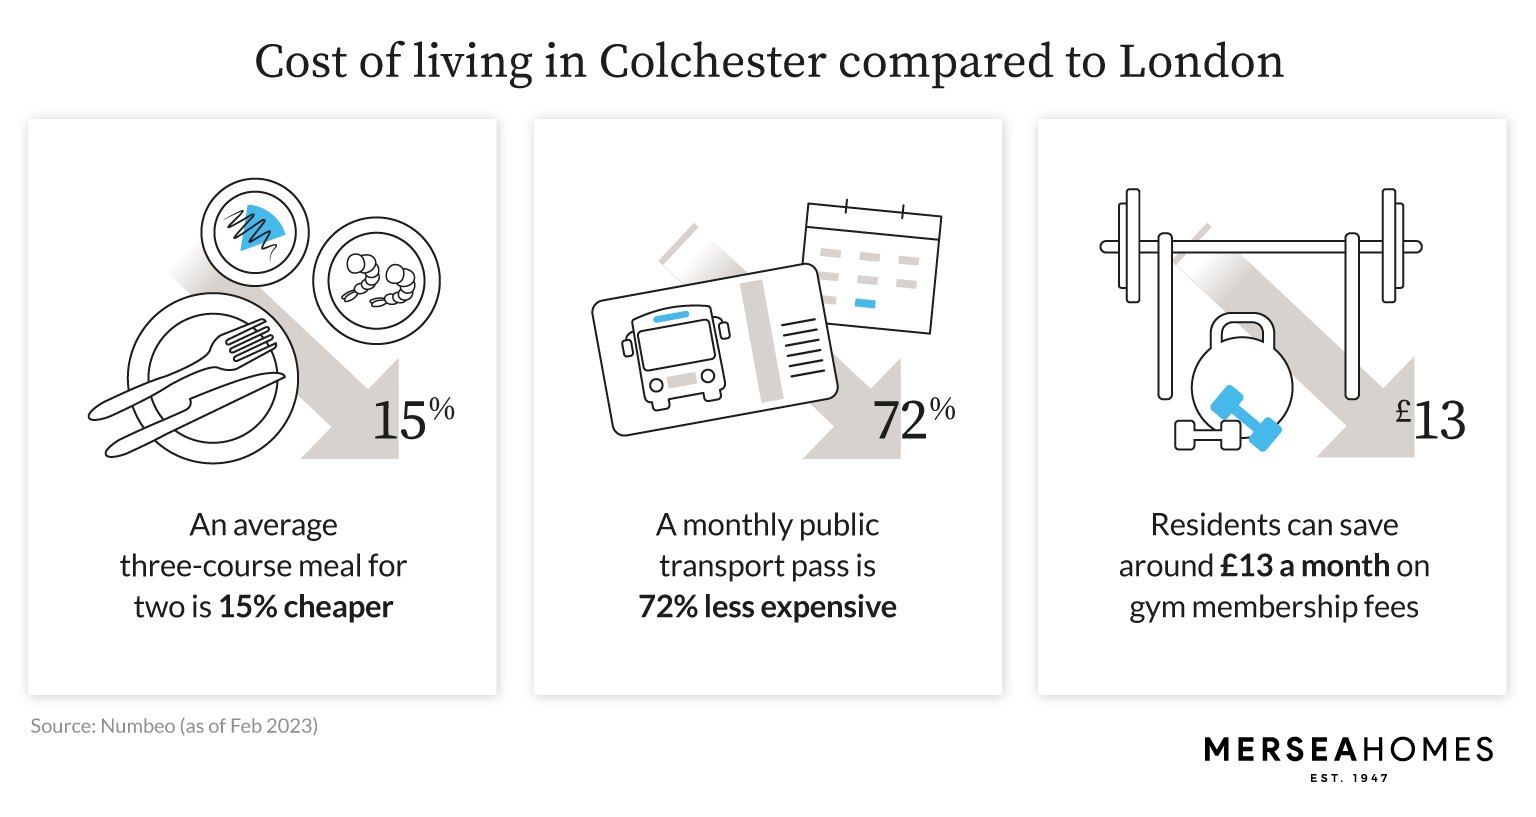 Cost of living in Colchester compared to London: Reasons to live in Colchester - infographic